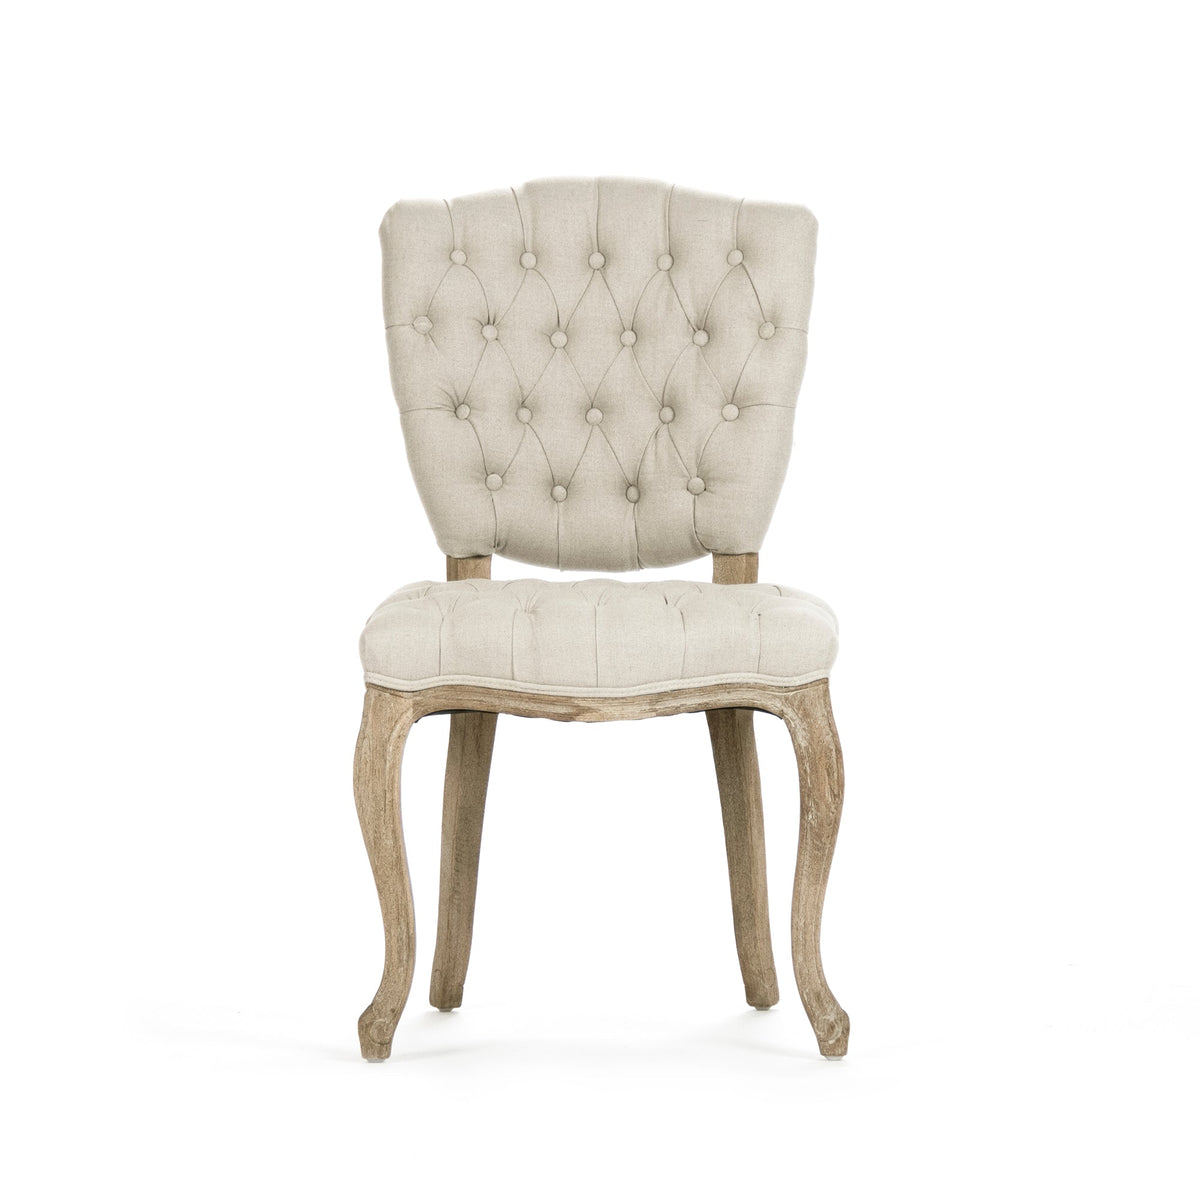 Piaf Side Chair by Zentique